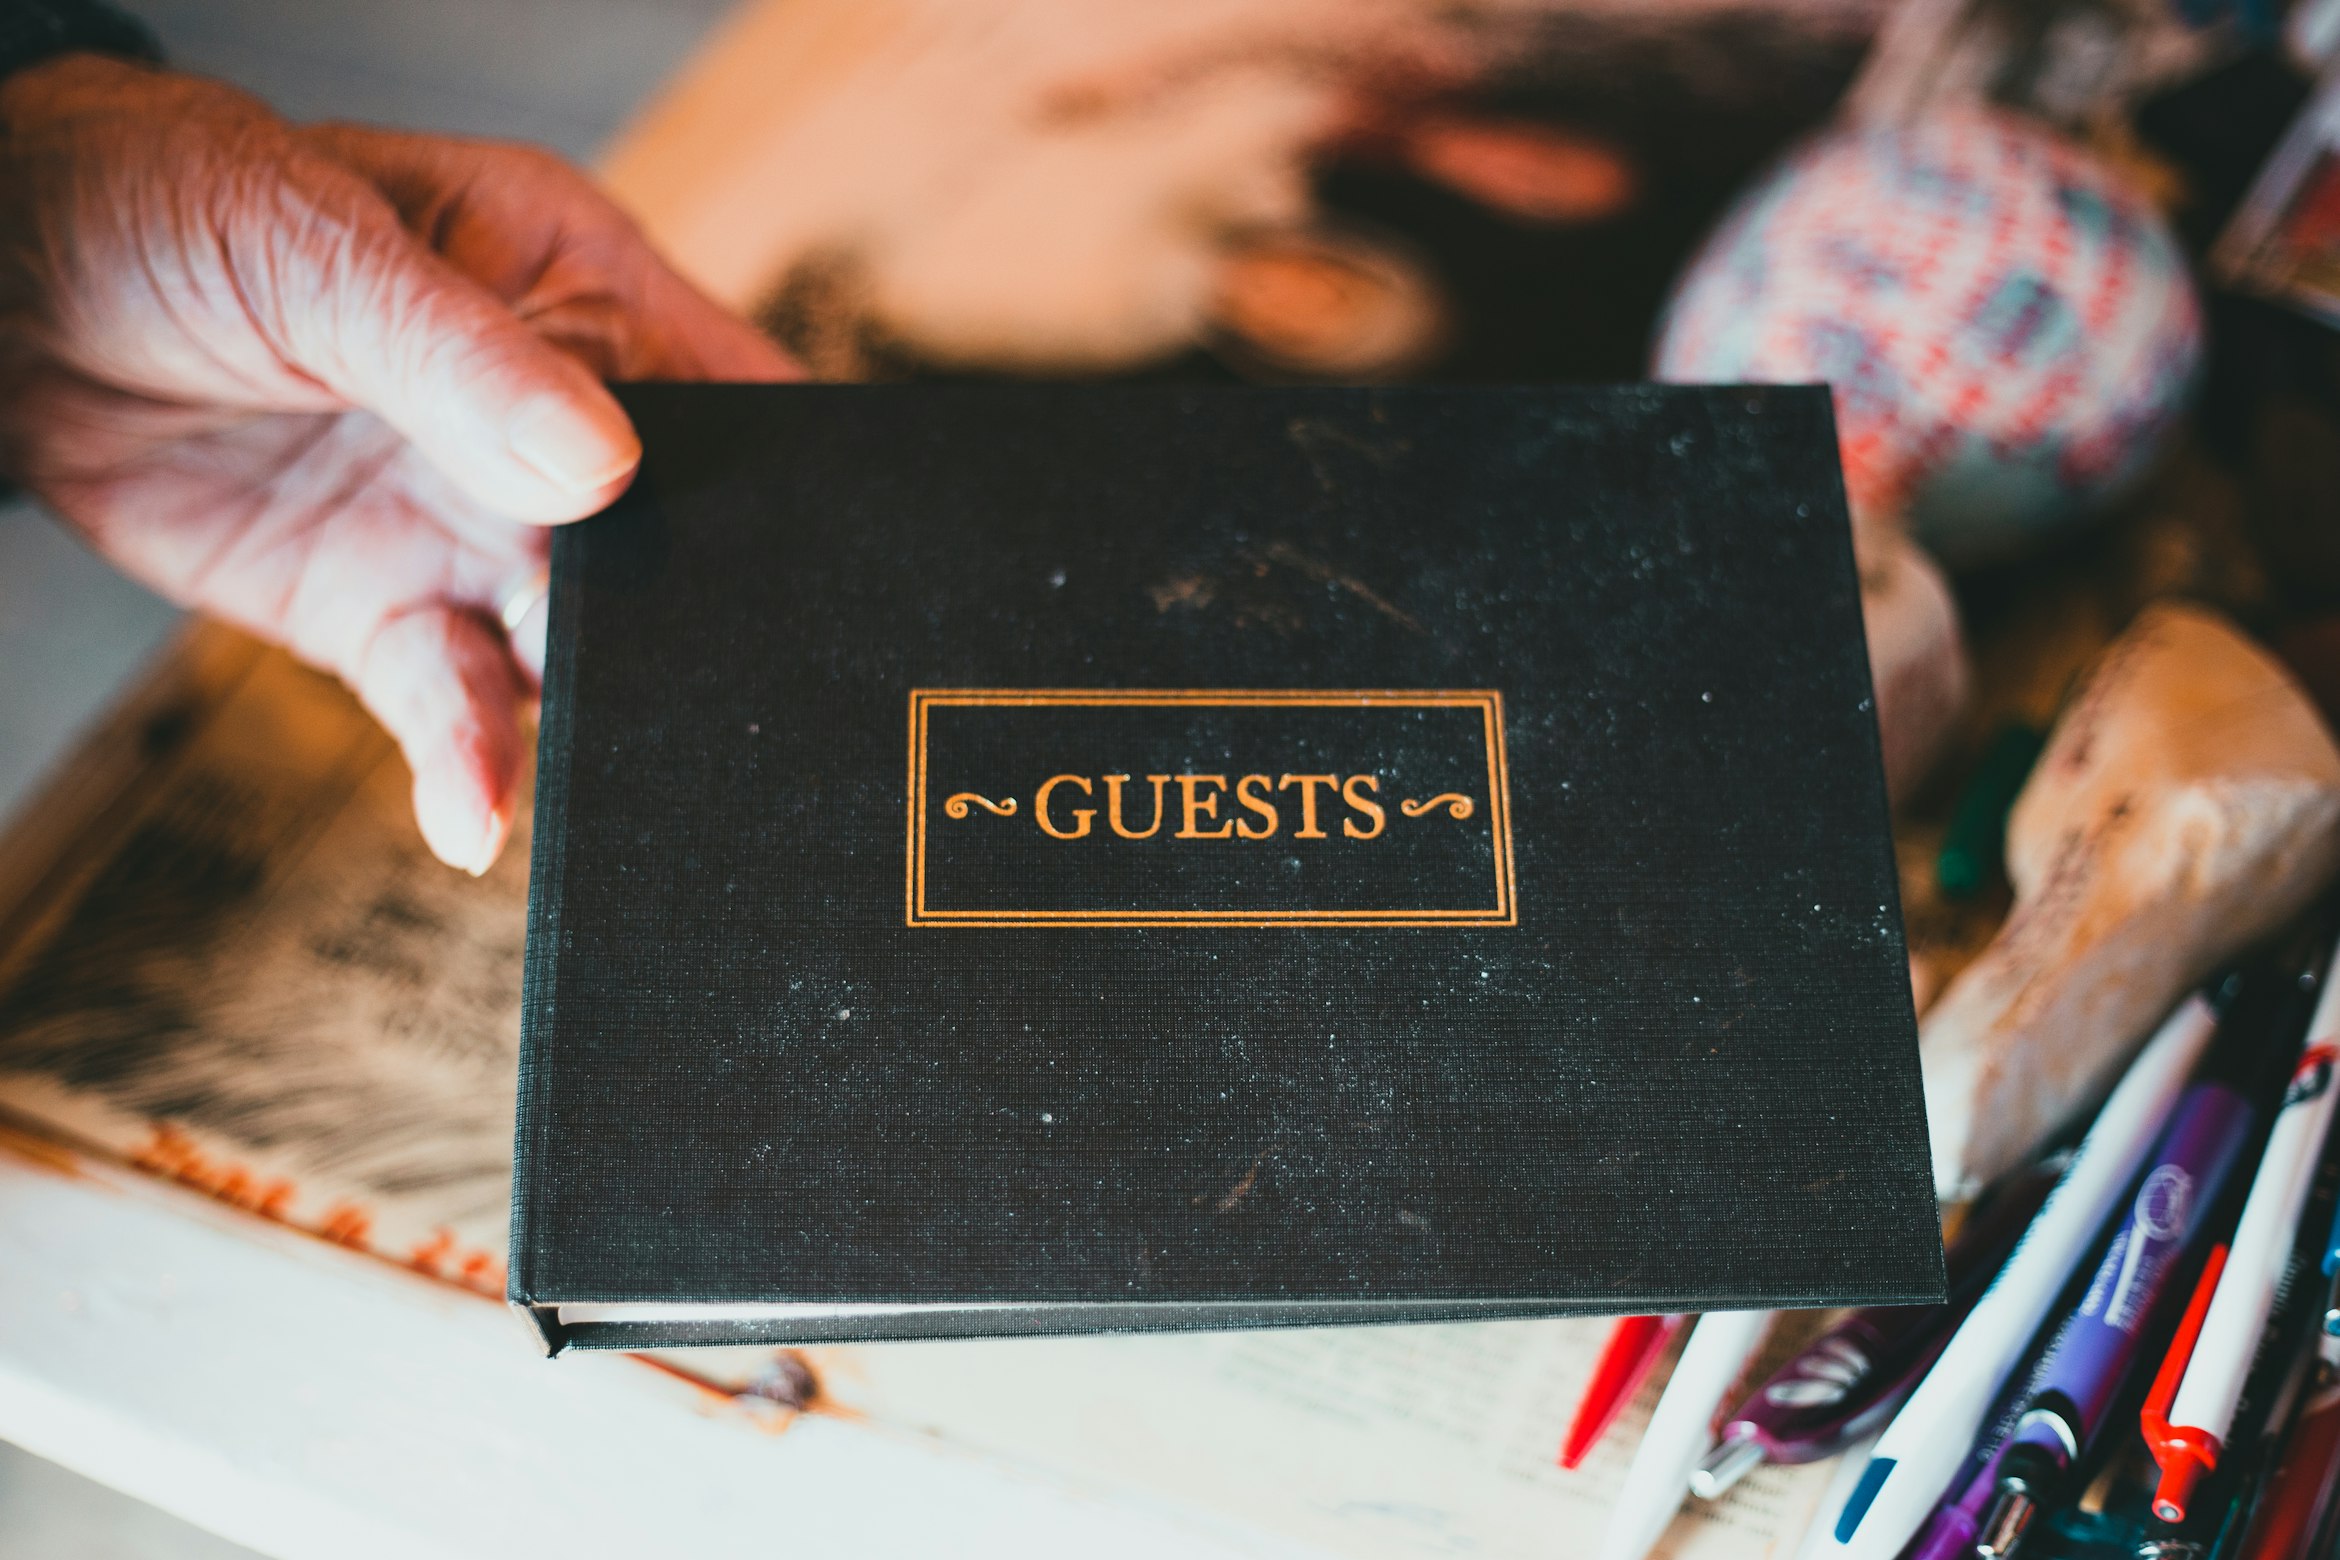 a human hand holding a black bound book with the word "Guests" printed in a gold color